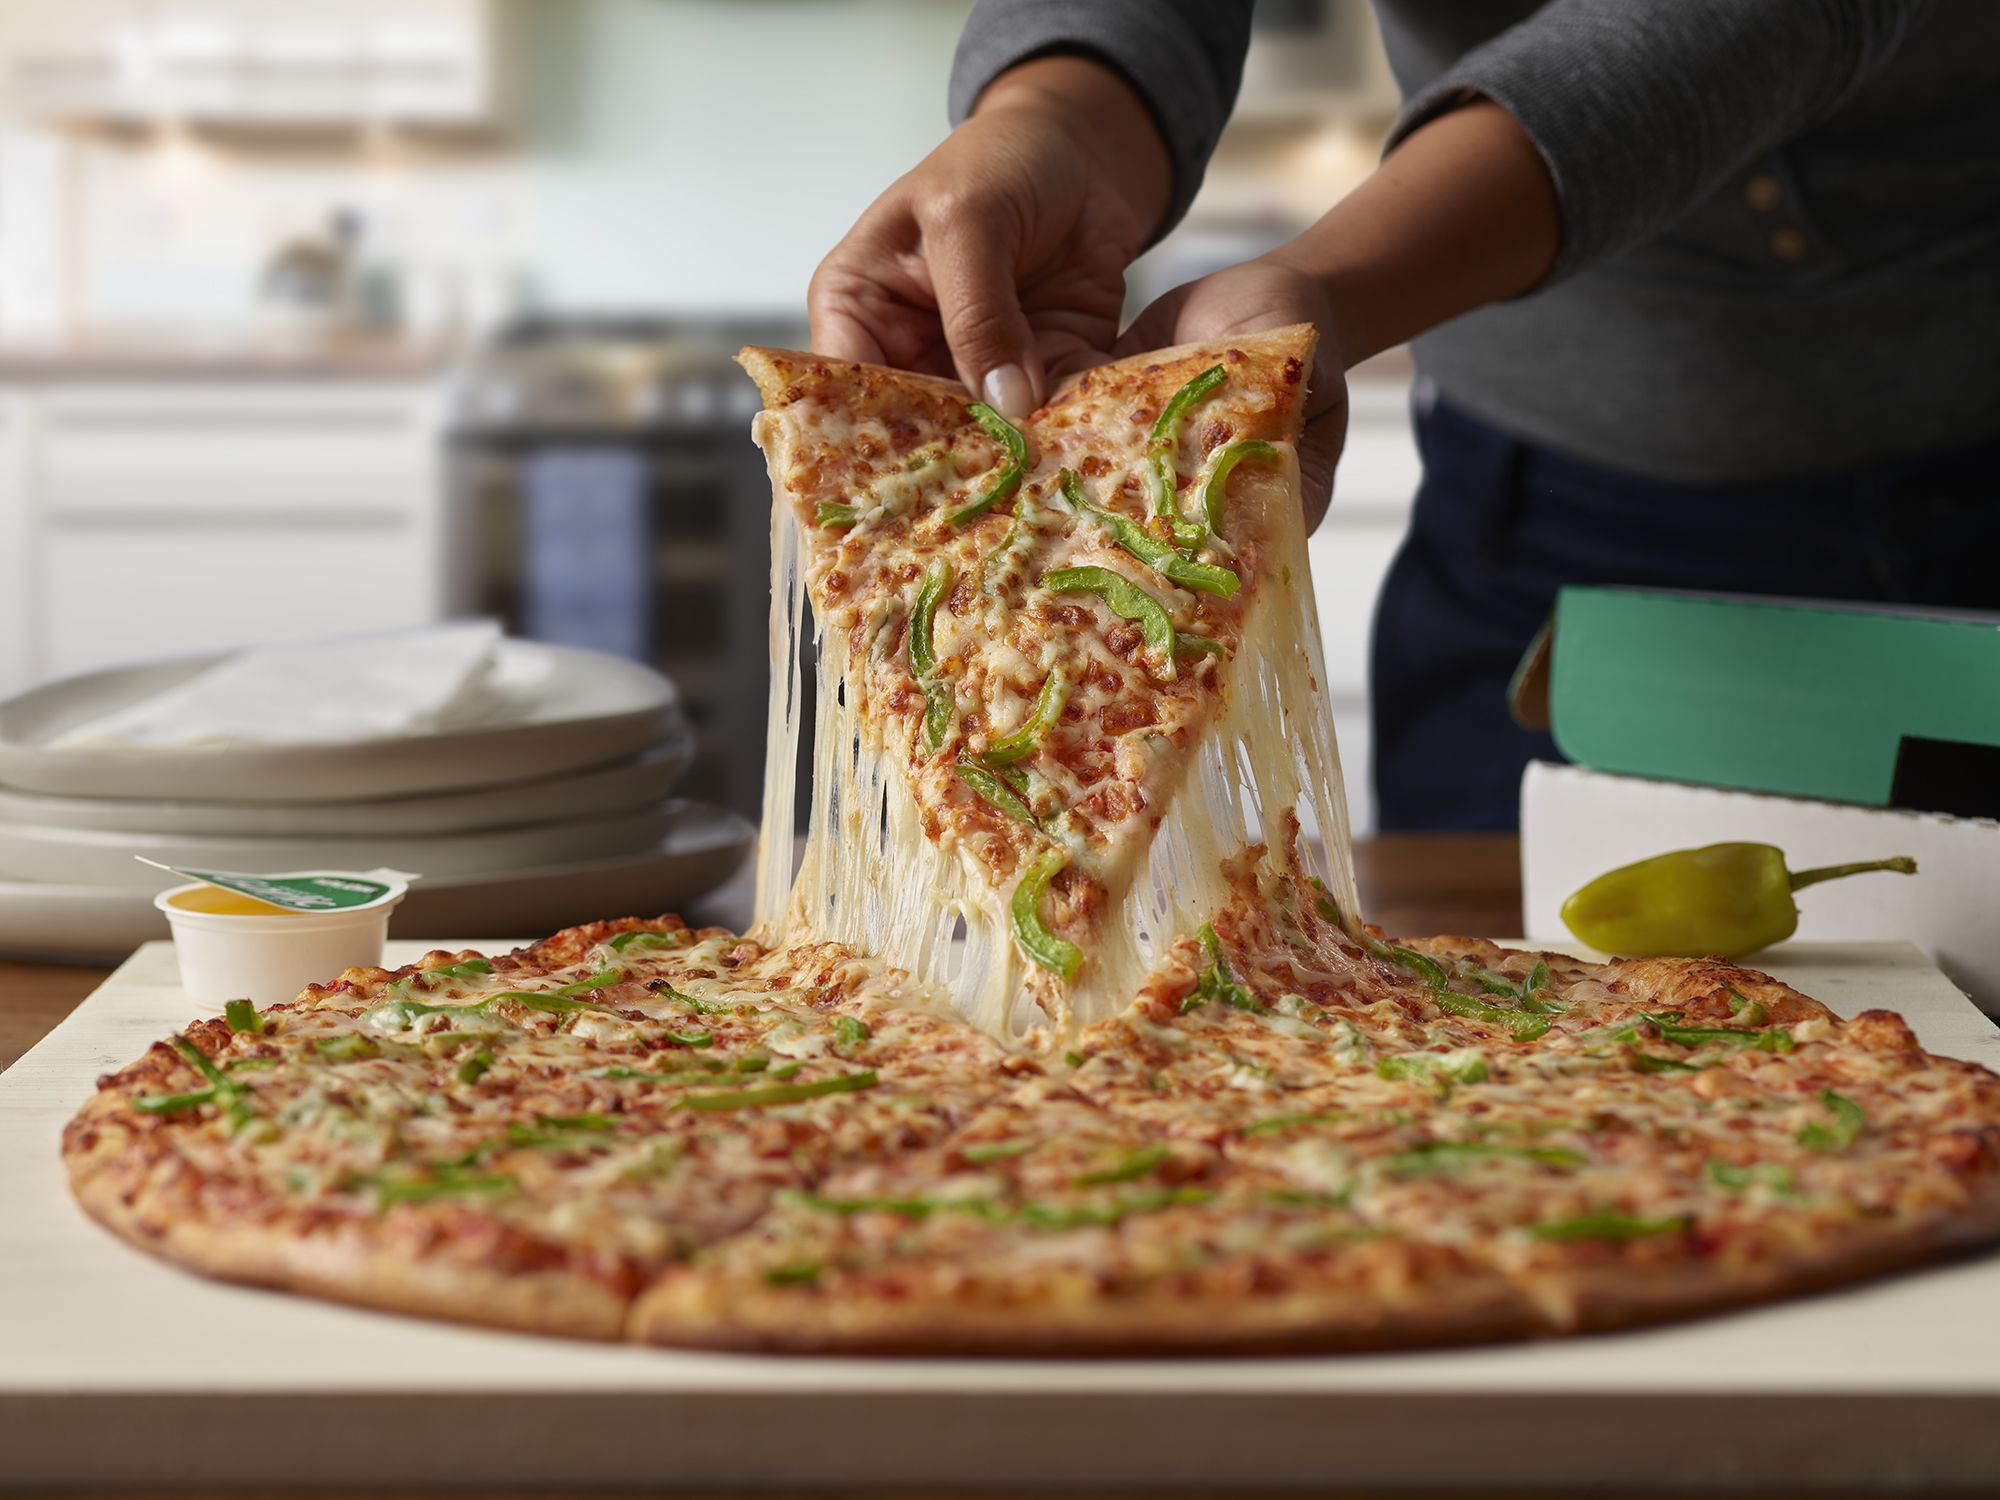 Papa Johns' new crust is inspired by a city known for its pizza